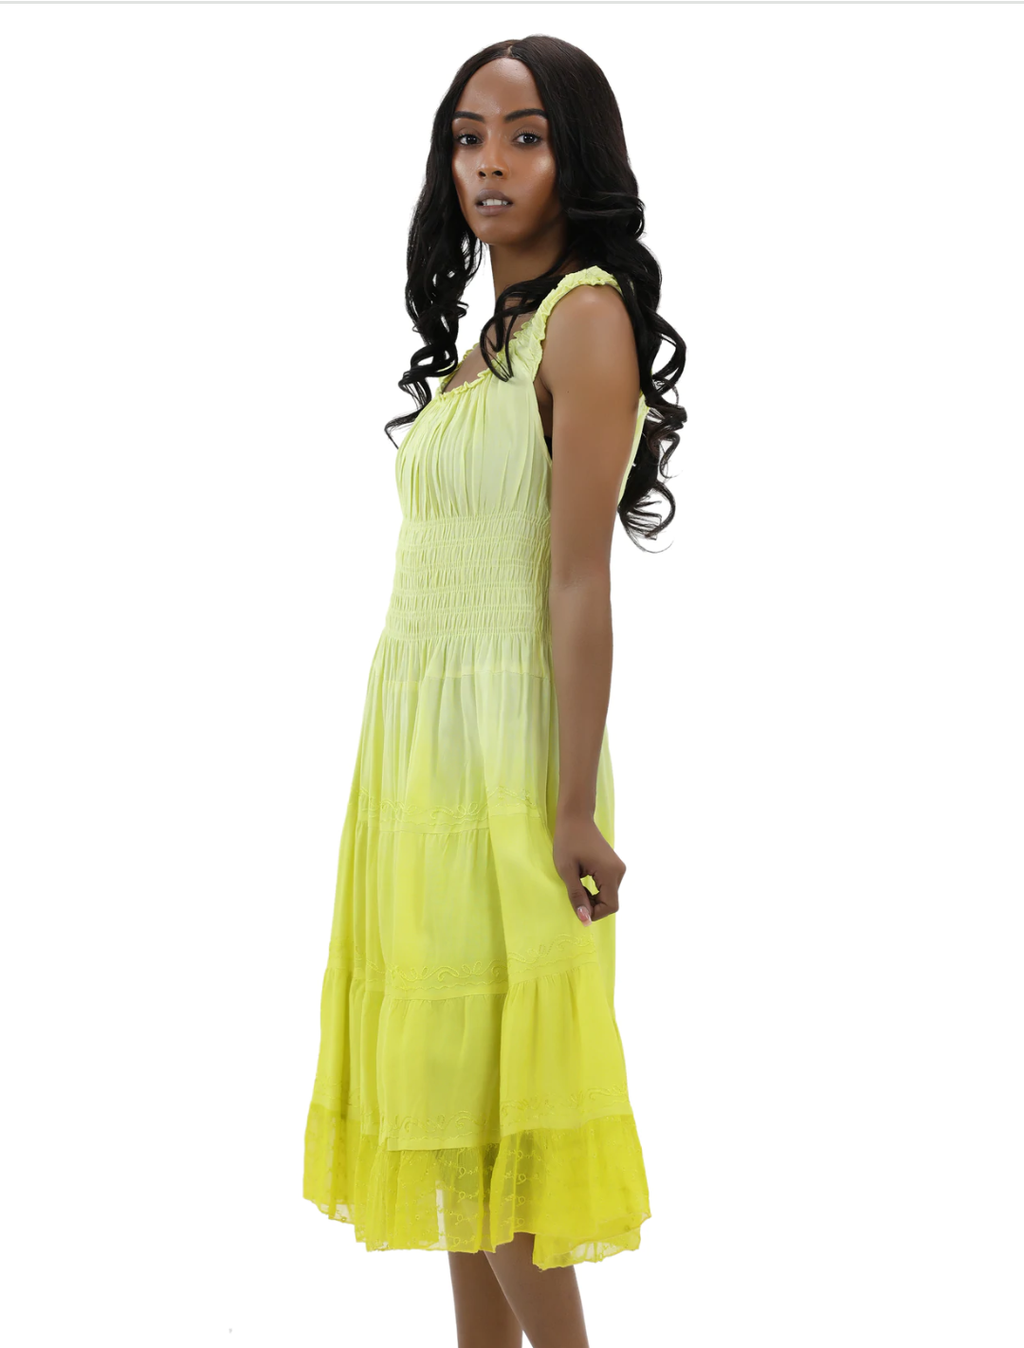 Ombre dyed sundress